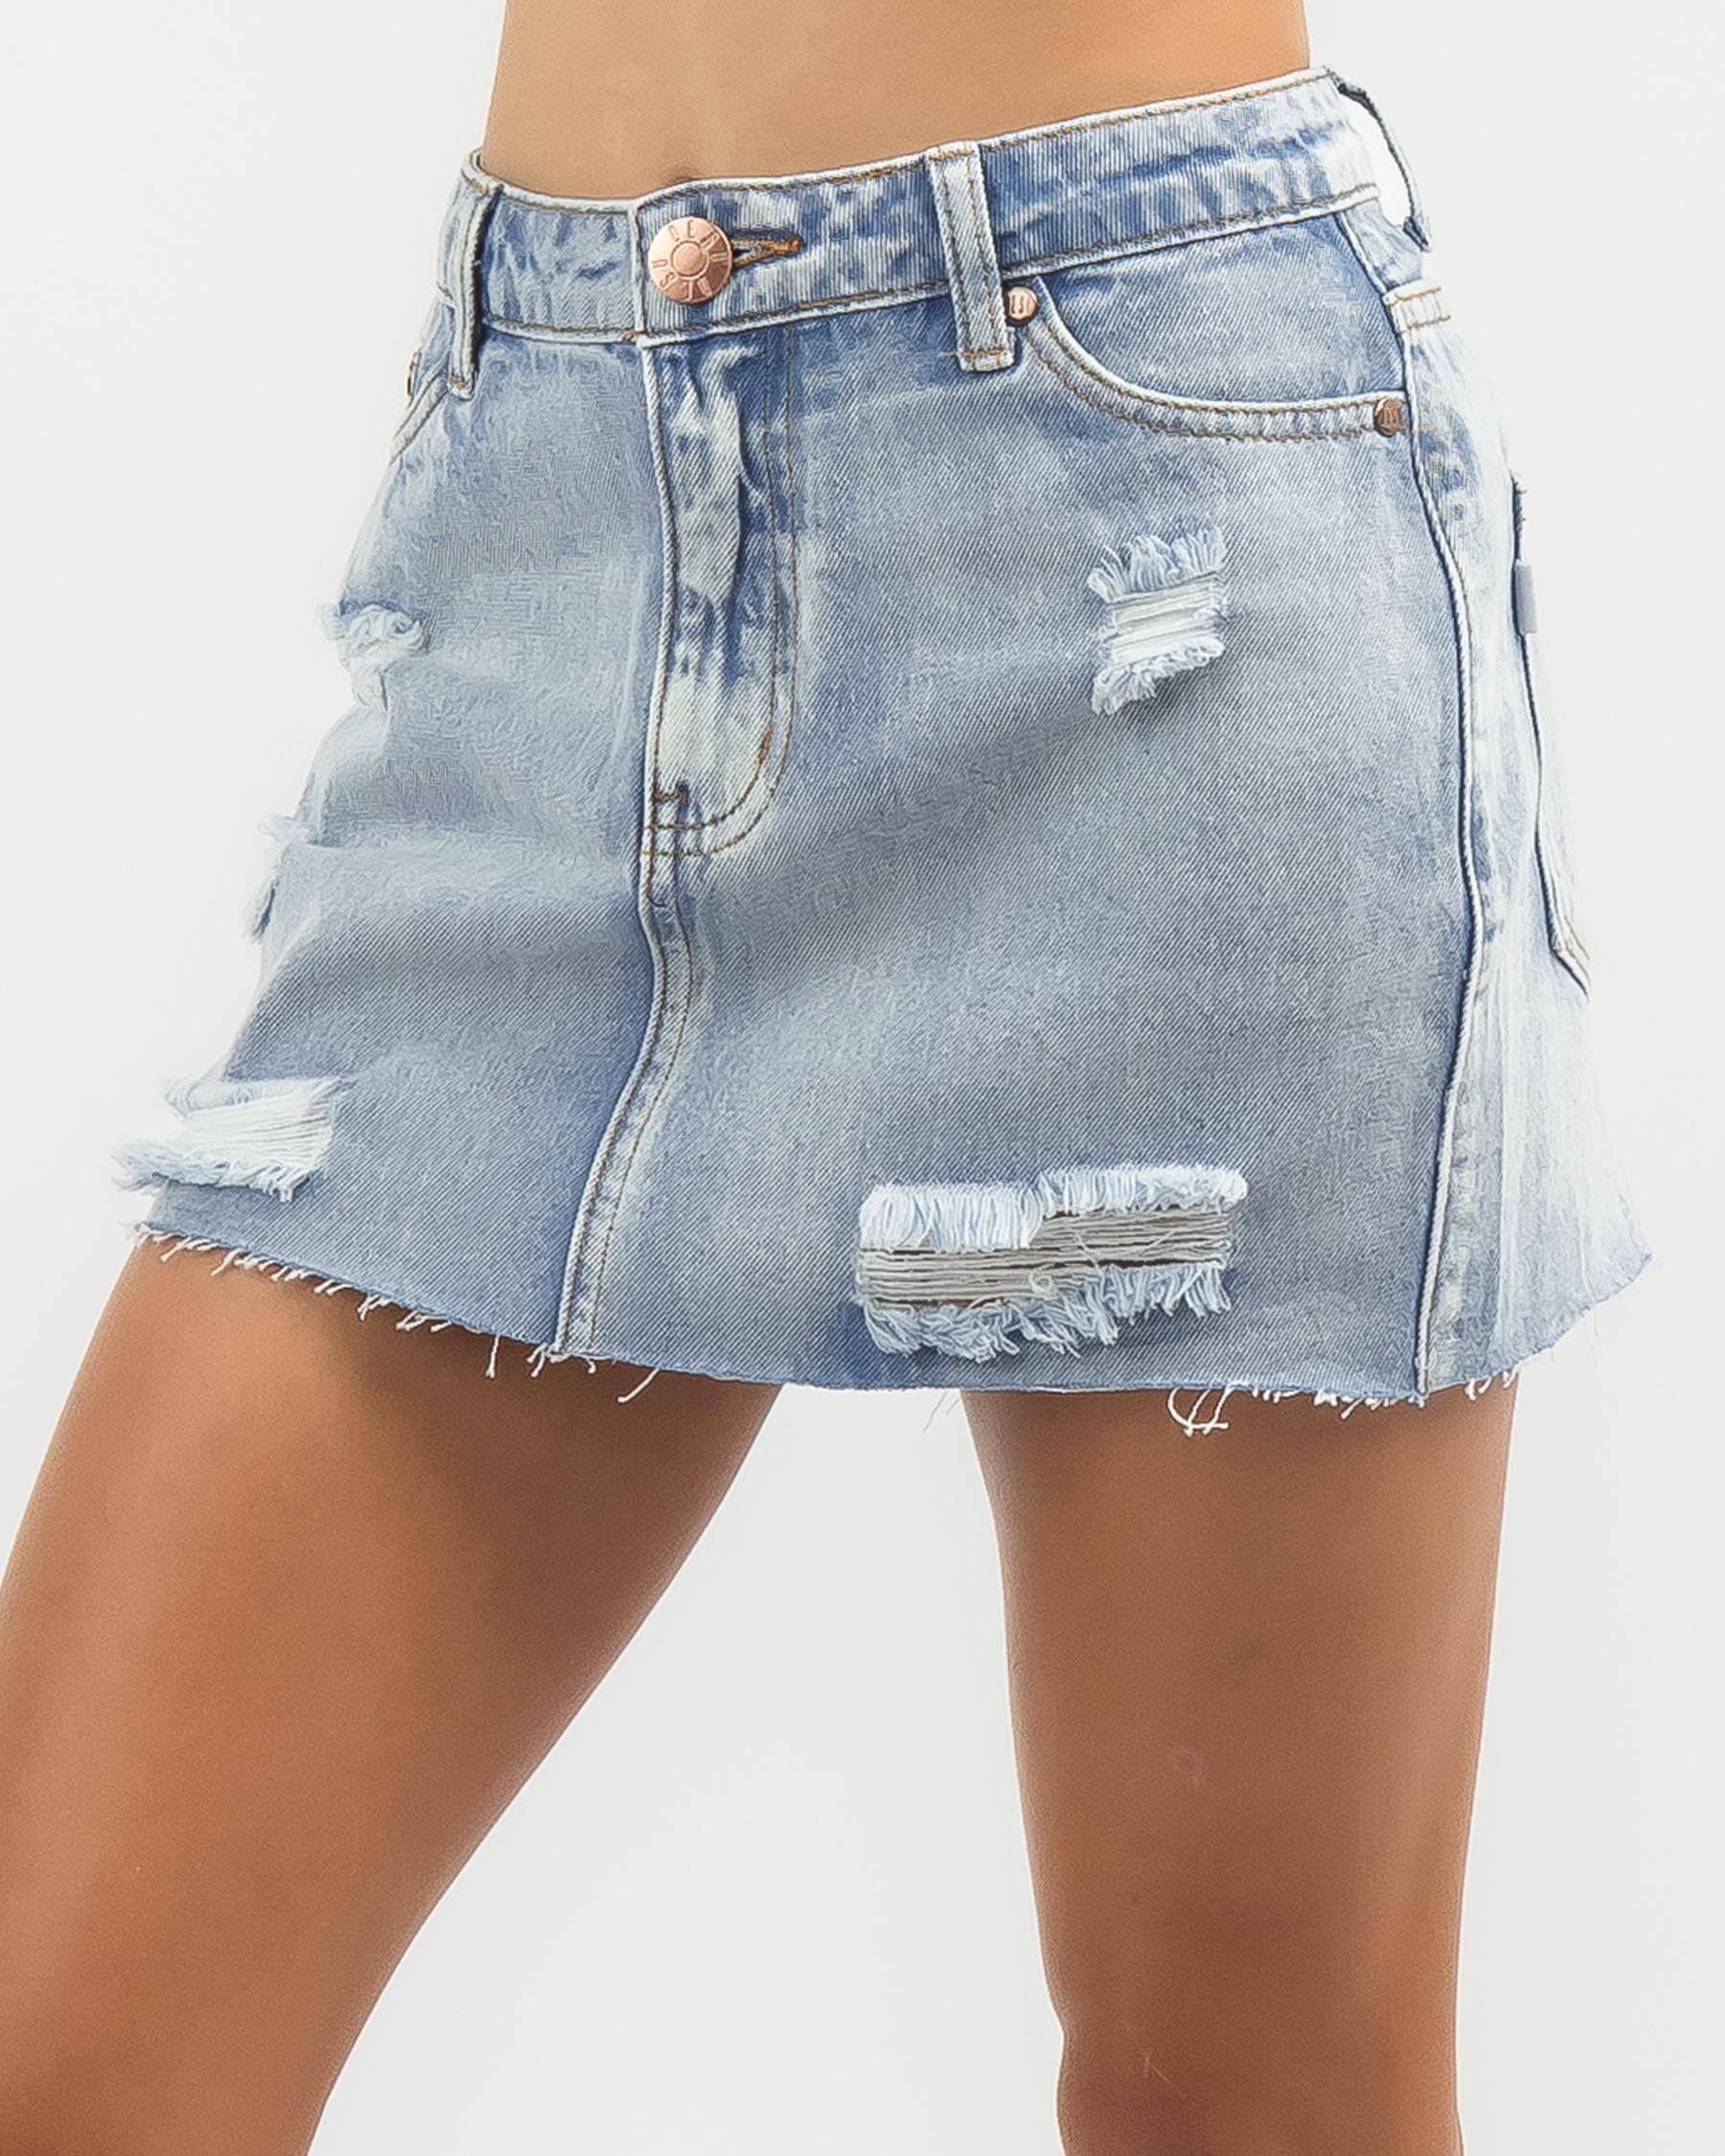 DESU Girls' Lo Rider Ripped Skirt In Light Mid Blue - Fast Shipping ...